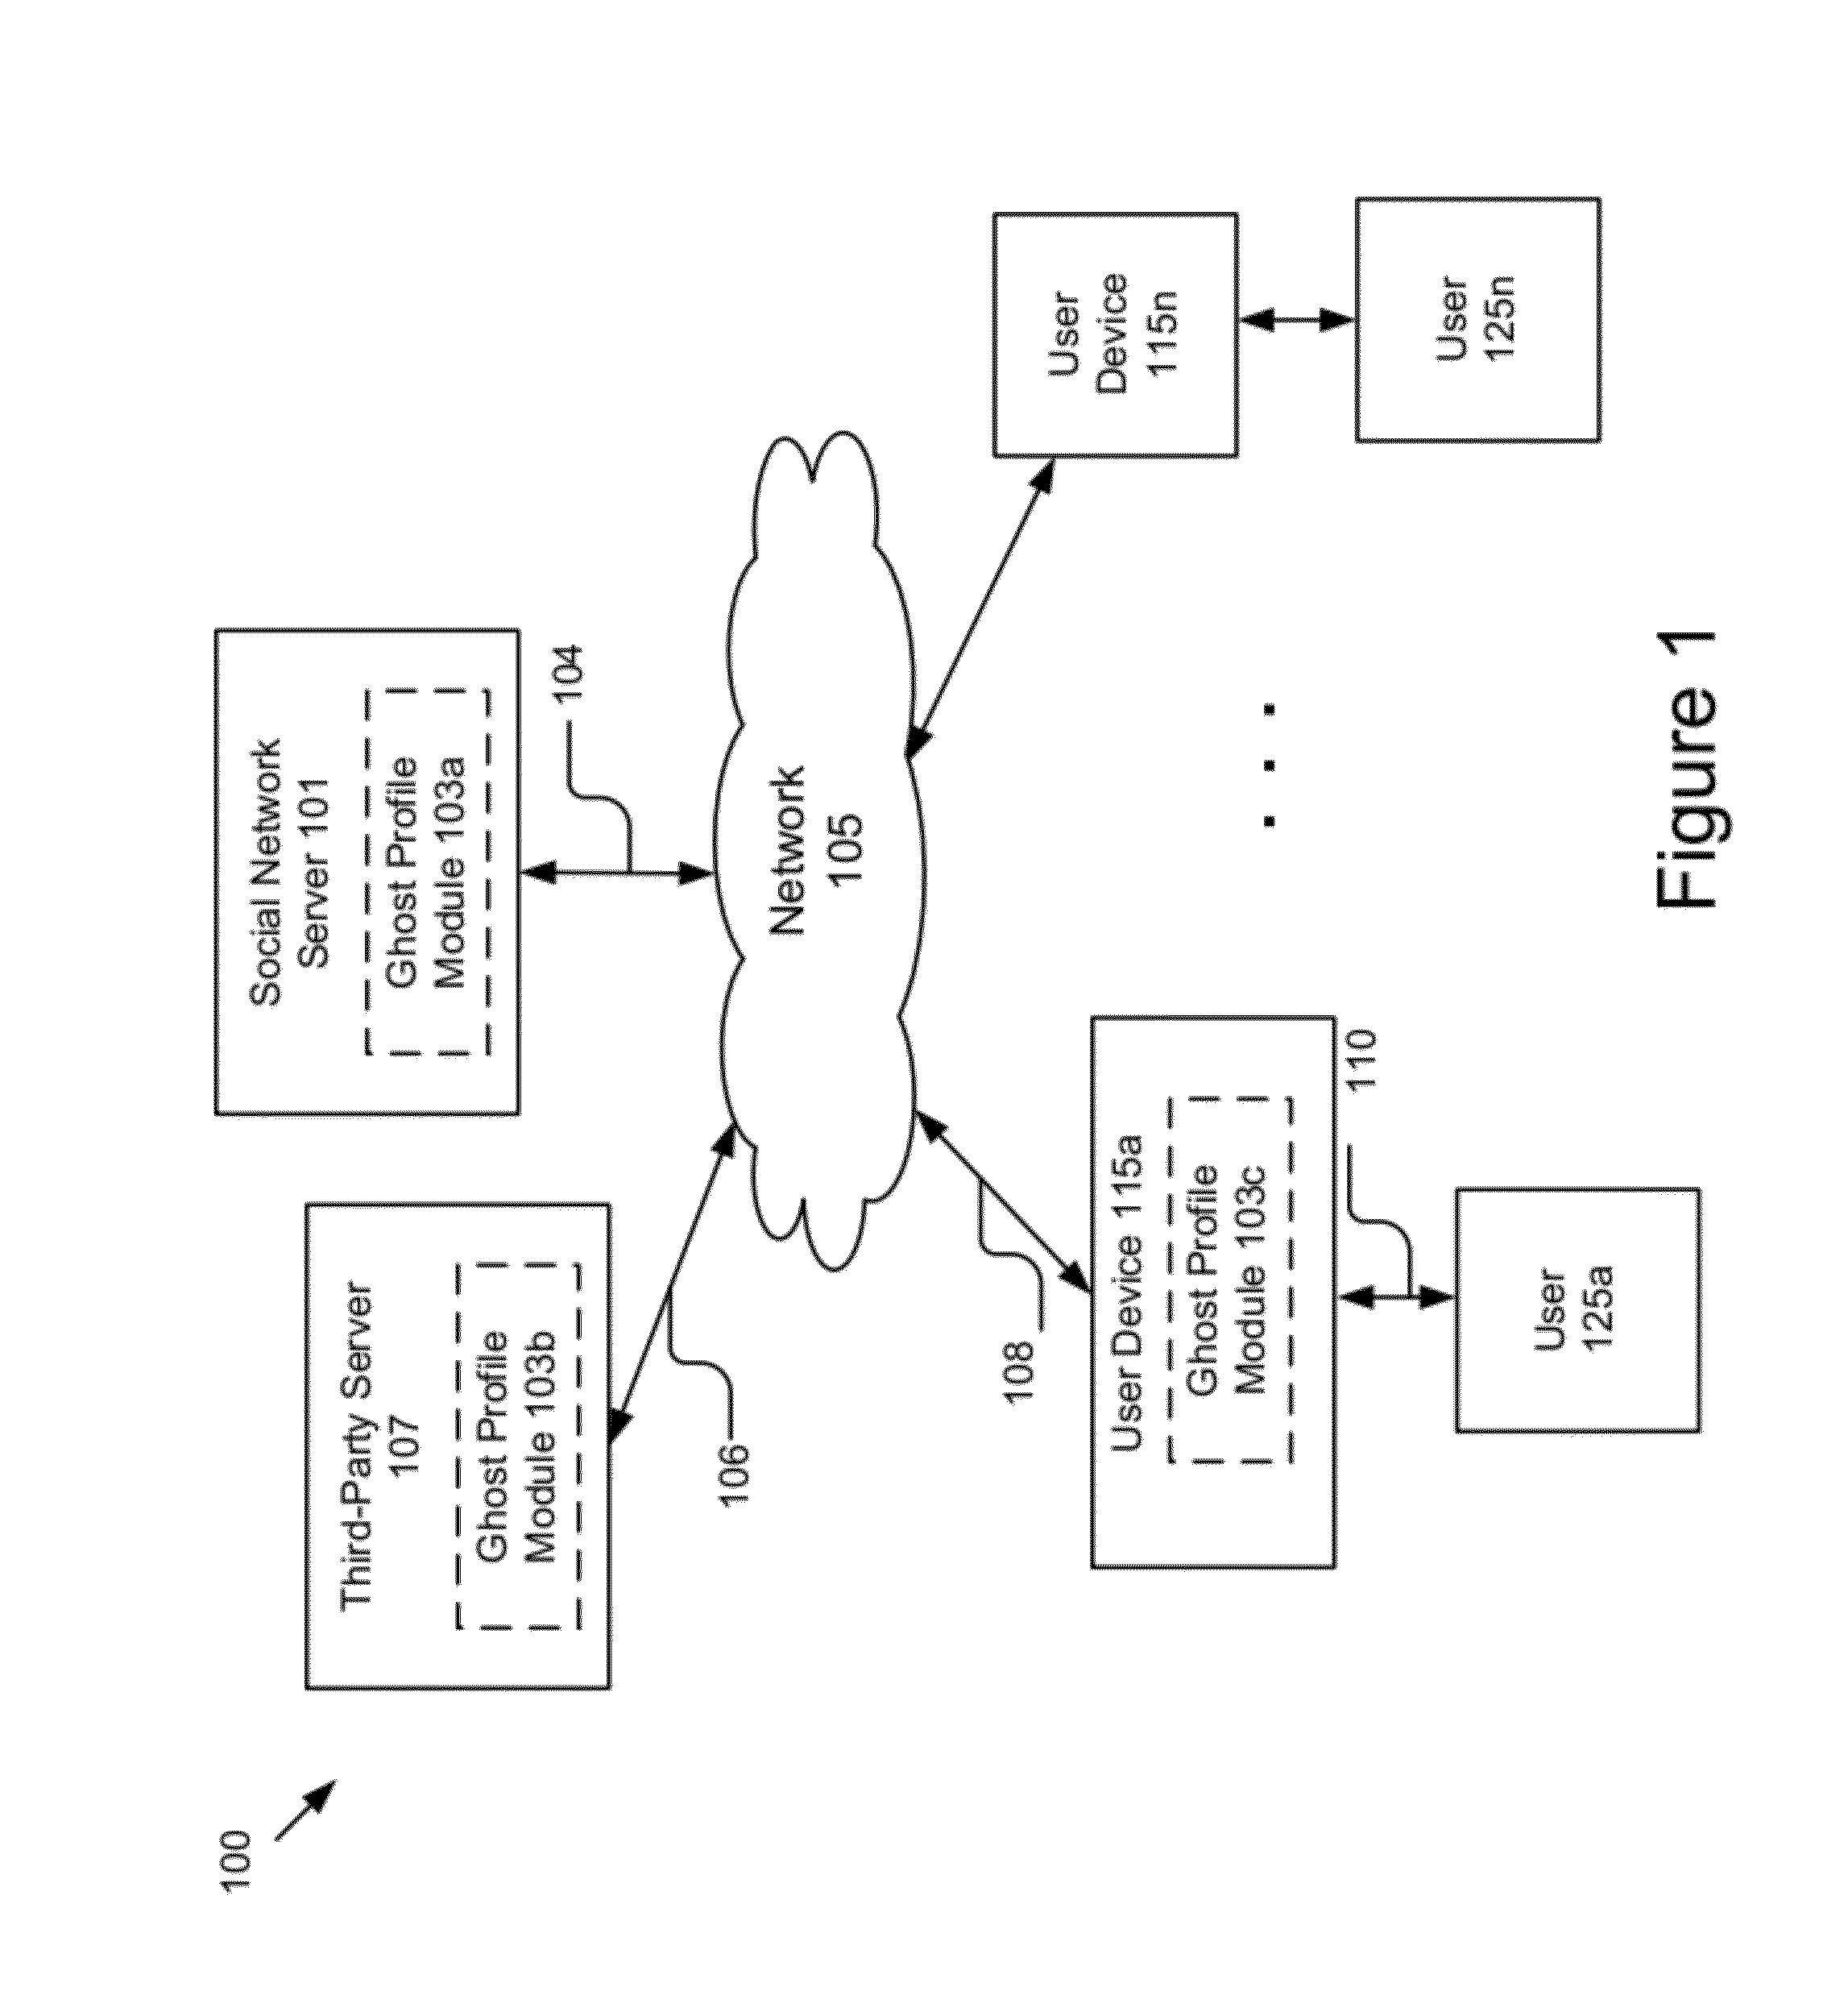 System and method for generating a ghost profile for a social network